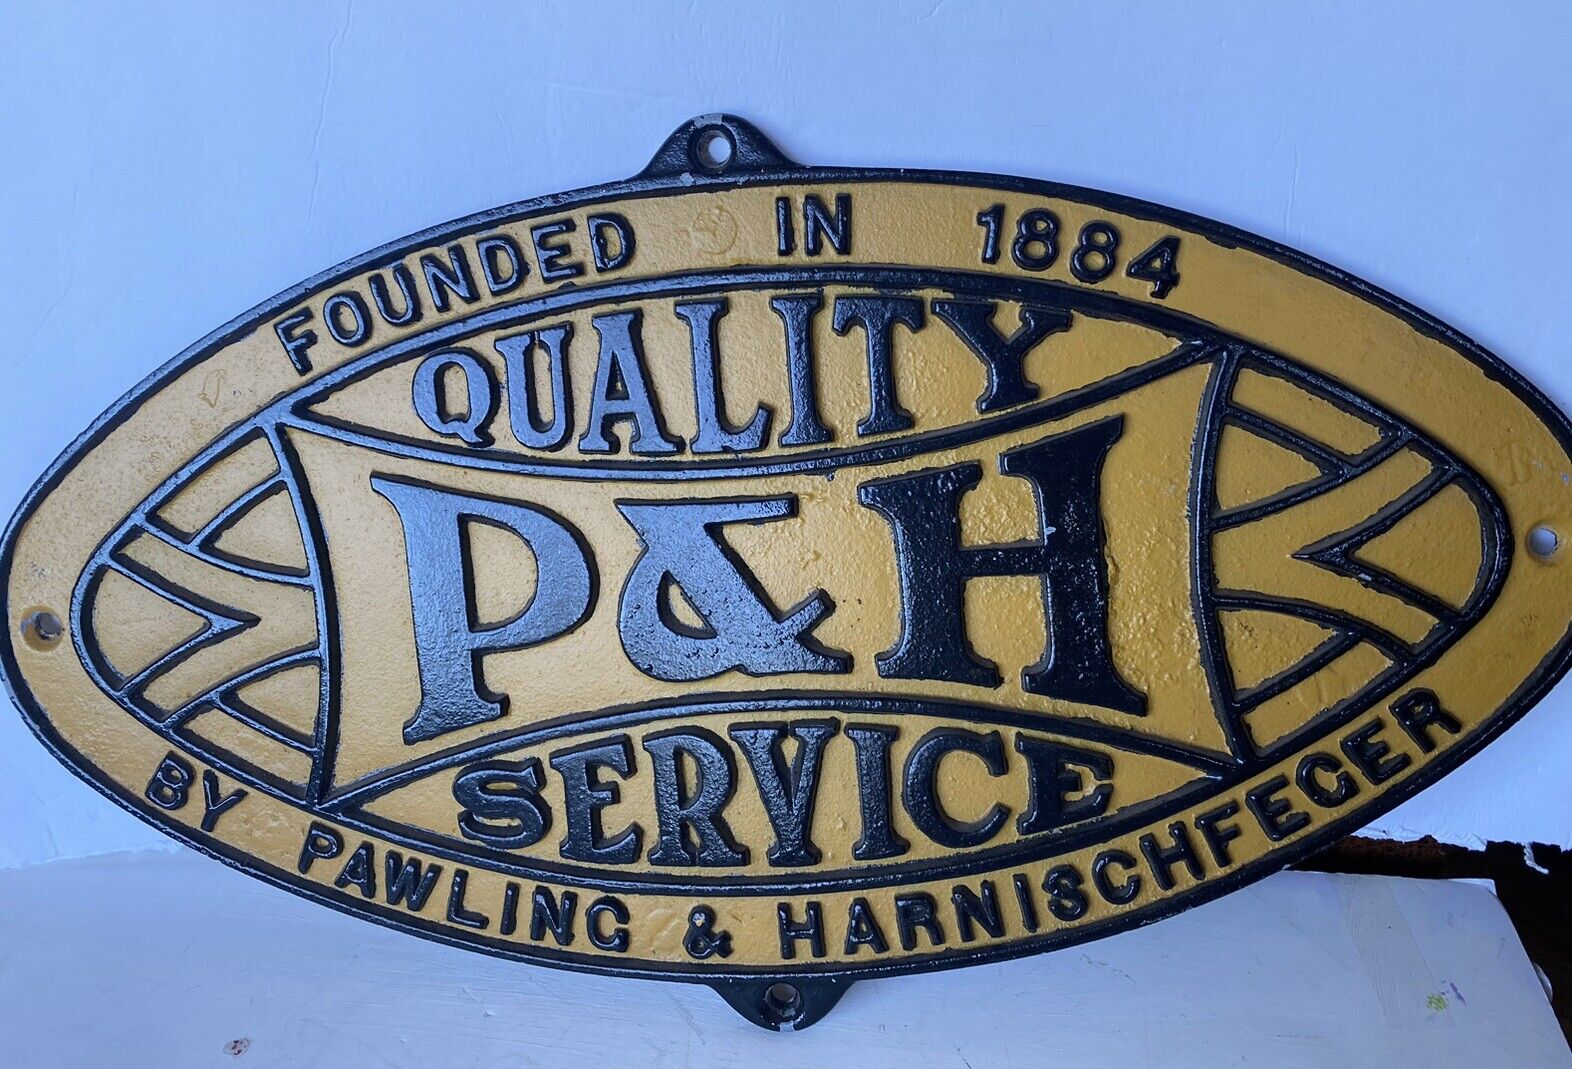 Vintage P&H Service Pawling and Harnischfeger Heavy Metal Advertising Sign RARE